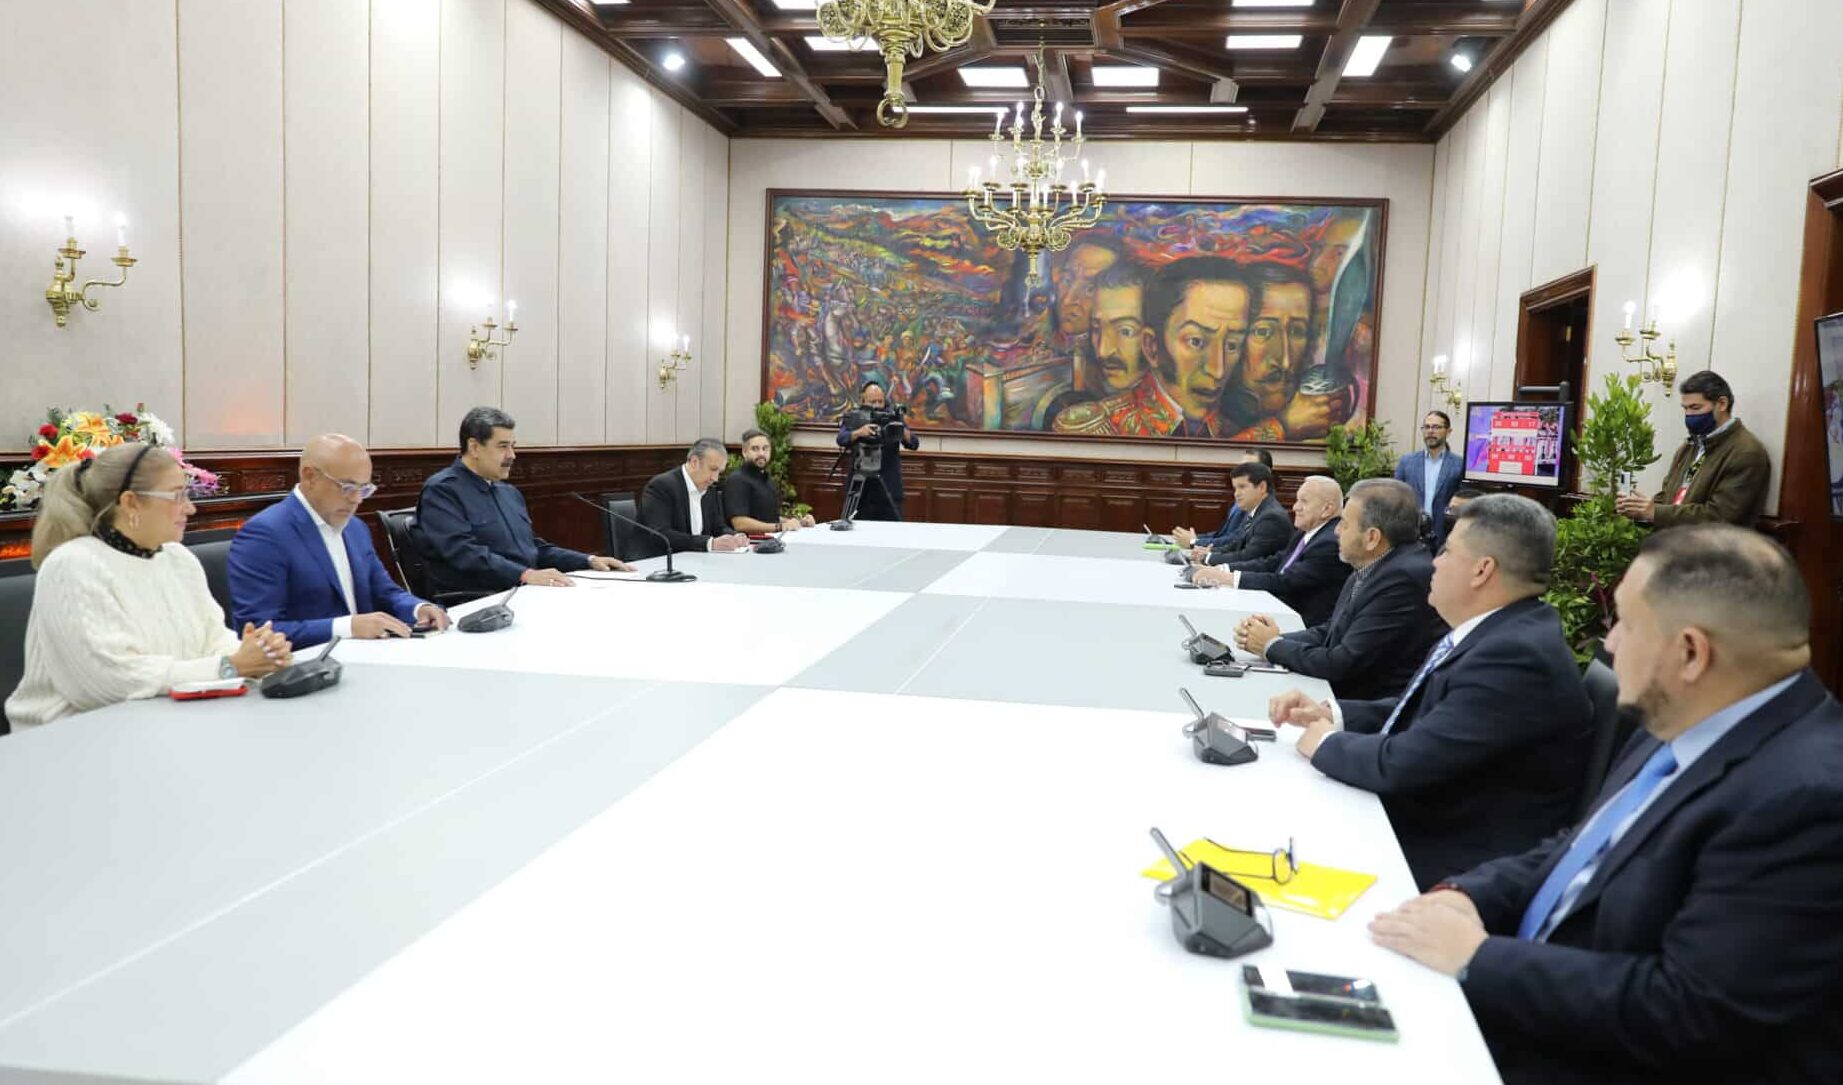 Venezuelan President Nicolás Maduro (center left) in a meeting at Miraflores Palace, accompanied by (from left to right) Cilia FLores, Jorge Rodríguez, Tareck El Aissami, and Nicolás Maduro Guerra, and opposition leaders on the other side, from right to left, Jose Pinto, Luís Parra, Timoteo Zambrano, Bernabé Gutiérrez, and Juan Carlos Alvarado, December 2, 2022. Photo: Presidential Press.